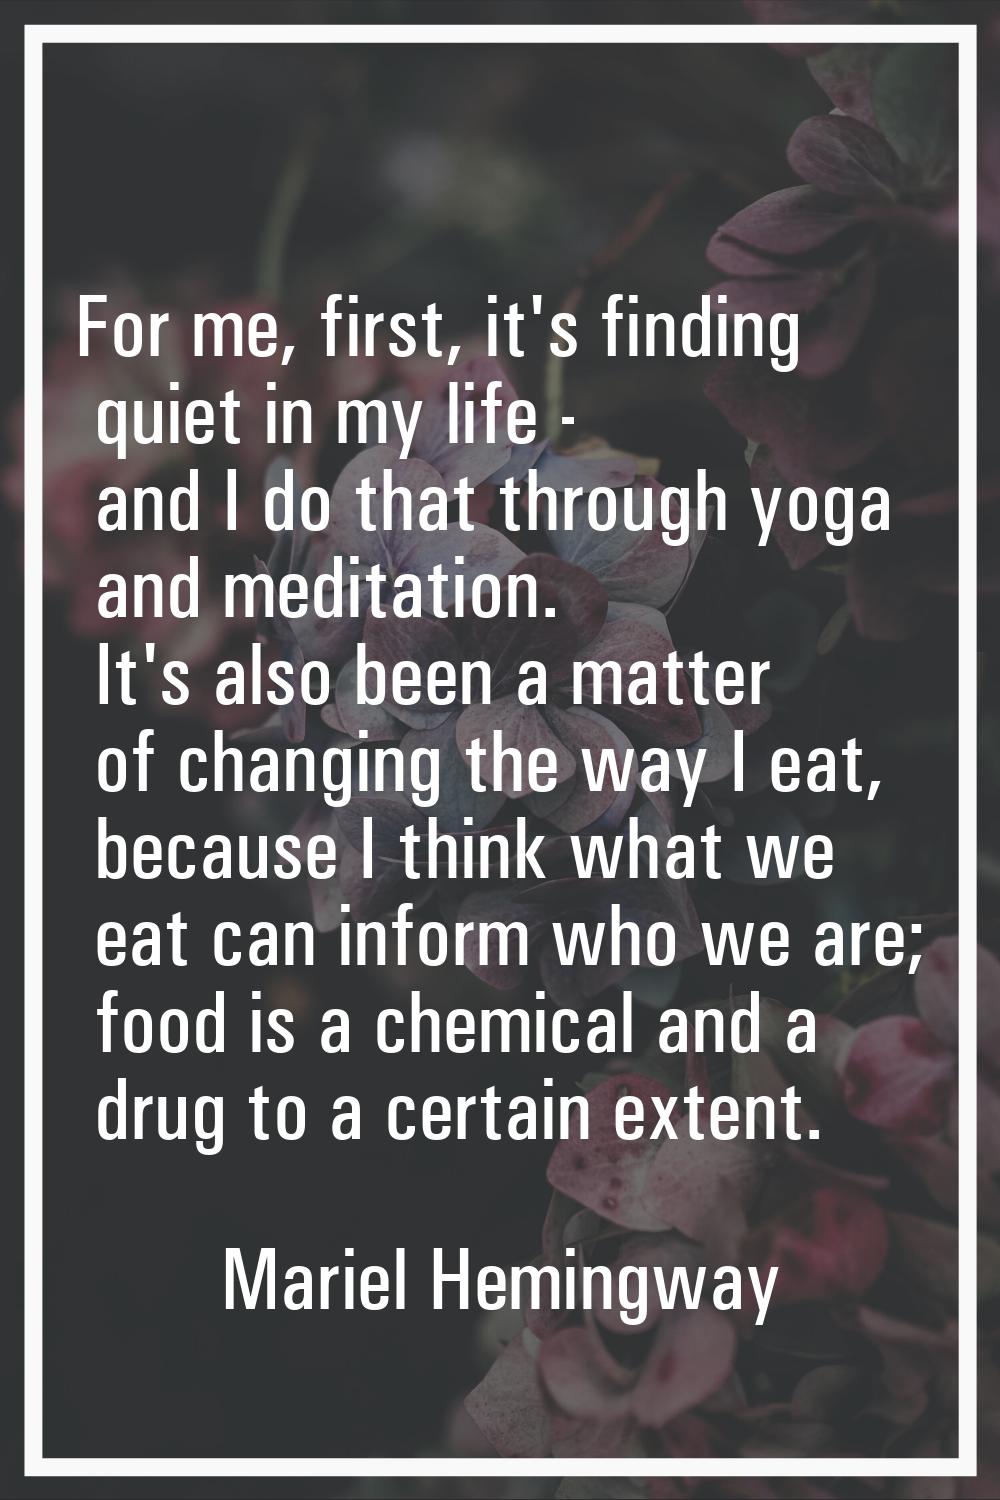 For me, first, it's finding quiet in my life - and I do that through yoga and meditation. It's also